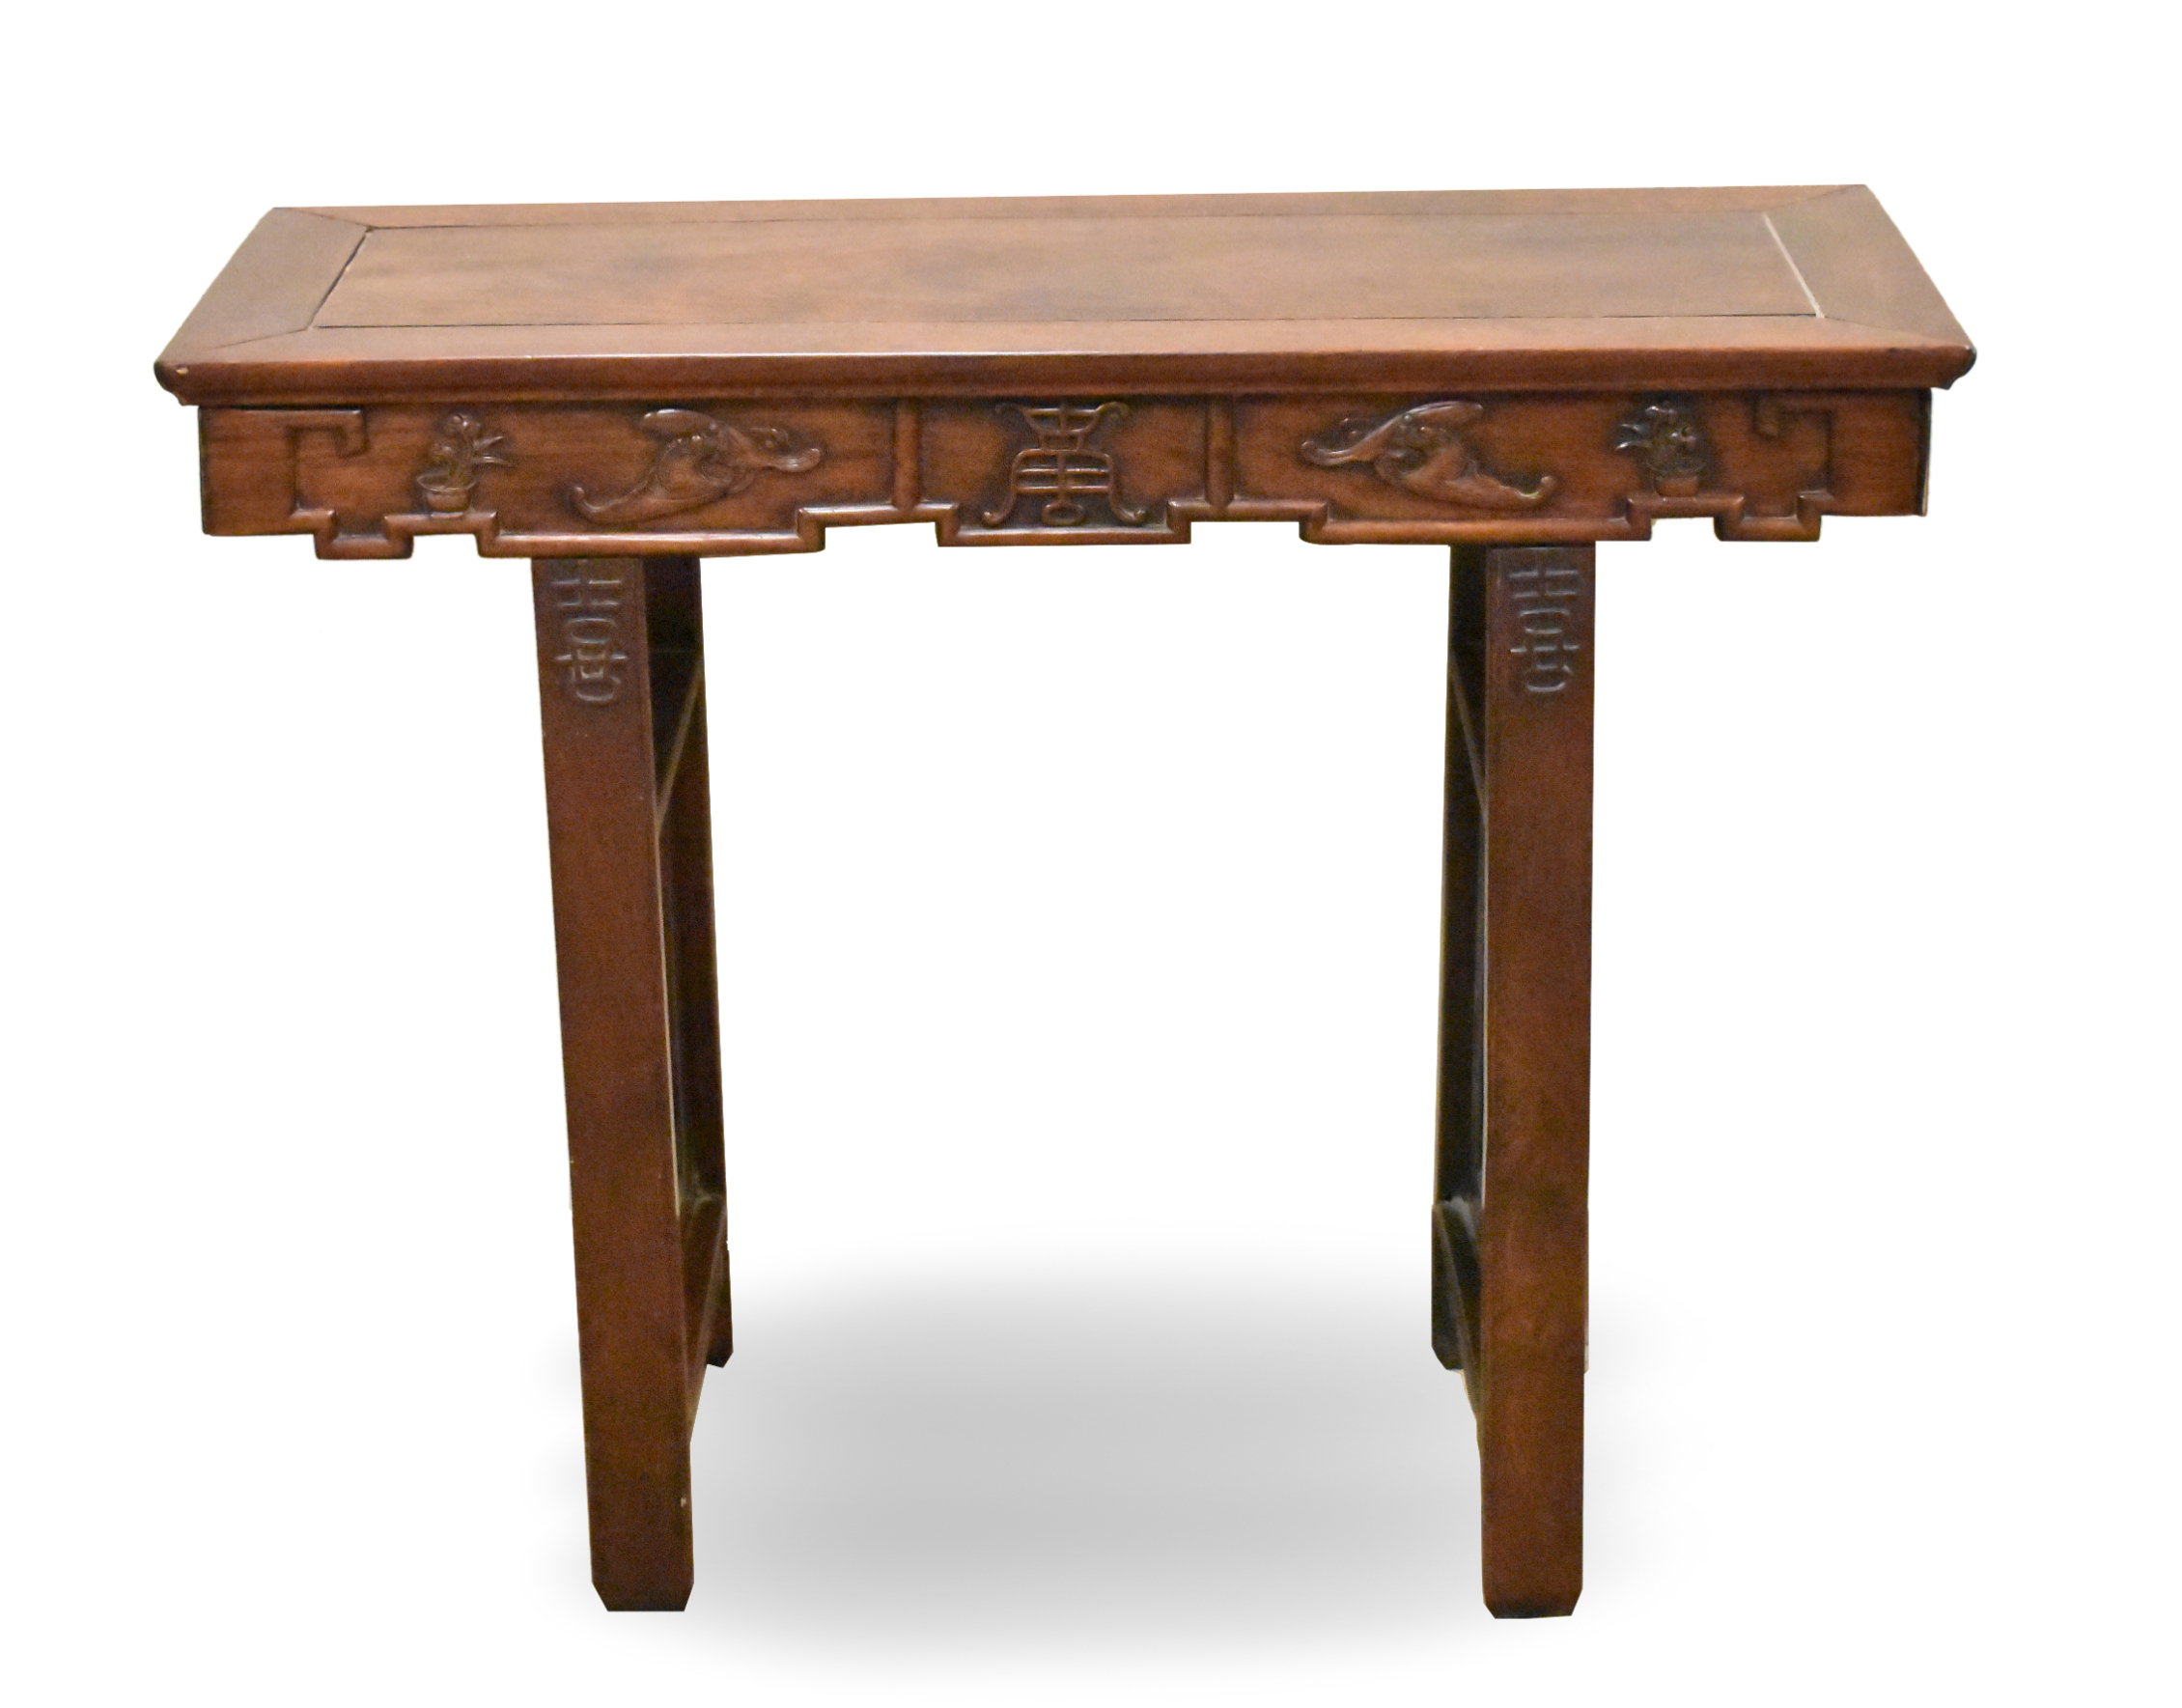 CHINESE HARDWOOD ALTAR TABLE 20TH 339e5c